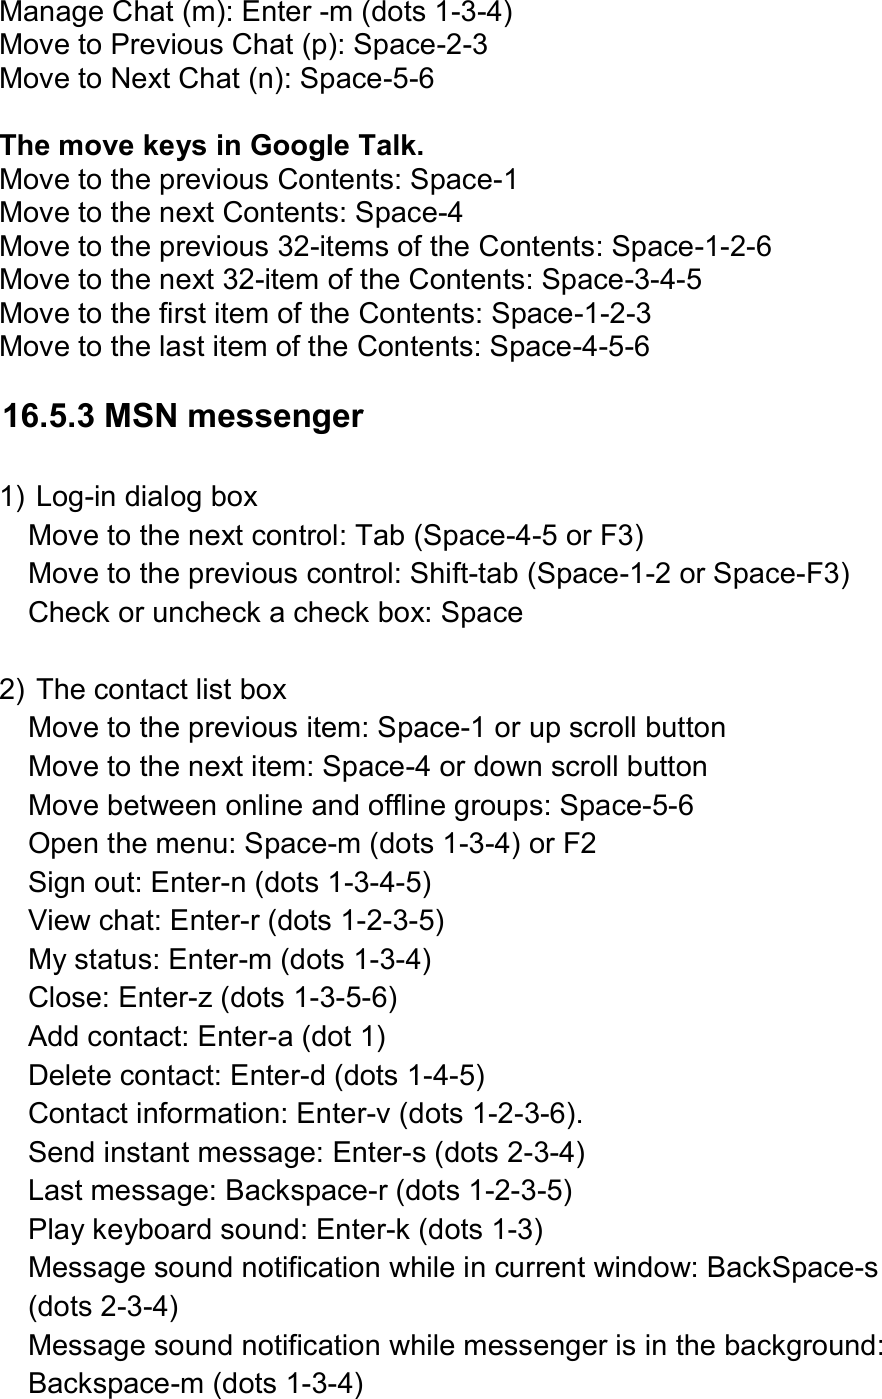  Manage Chat (m): Enter -m (dots 1-3-4) Move to Previous Chat (p): Space-2-3 Move to Next Chat (n): Space-5-6  The move keys in Google Talk. Move to the previous Contents: Space-1   Move to the next Contents: Space-4 Move to the previous 32-items of the Contents: Space-1-2-6   Move to the next 32-item of the Contents: Space-3-4-5 Move to the first item of the Contents: Space-1-2-3   Move to the last item of the Contents: Space-4-5-6    16.5.3 MSN messenger  1) Log-in dialog box Move to the next control: Tab (Space-4-5 or F3) Move to the previous control: Shift-tab (Space-1-2 or Space-F3) Check or uncheck a check box: Space  2) The contact list box Move to the previous item: Space-1 or up scroll button Move to the next item: Space-4 or down scroll button Move between online and offline groups: Space-5-6 Open the menu: Space-m (dots 1-3-4) or F2 Sign out: Enter-n (dots 1-3-4-5) View chat: Enter-r (dots 1-2-3-5) My status: Enter-m (dots 1-3-4) Close: Enter-z (dots 1-3-5-6) Add contact: Enter-a (dot 1) Delete contact: Enter-d (dots 1-4-5) Contact information: Enter-v (dots 1-2-3-6). Send instant message: Enter-s (dots 2-3-4) Last message: Backspace-r (dots 1-2-3-5) Play keyboard sound: Enter-k (dots 1-3) Message sound notification while in current window: BackSpace-s (dots 2-3-4) Message sound notification while messenger is in the background: Backspace-m (dots 1-3-4) 